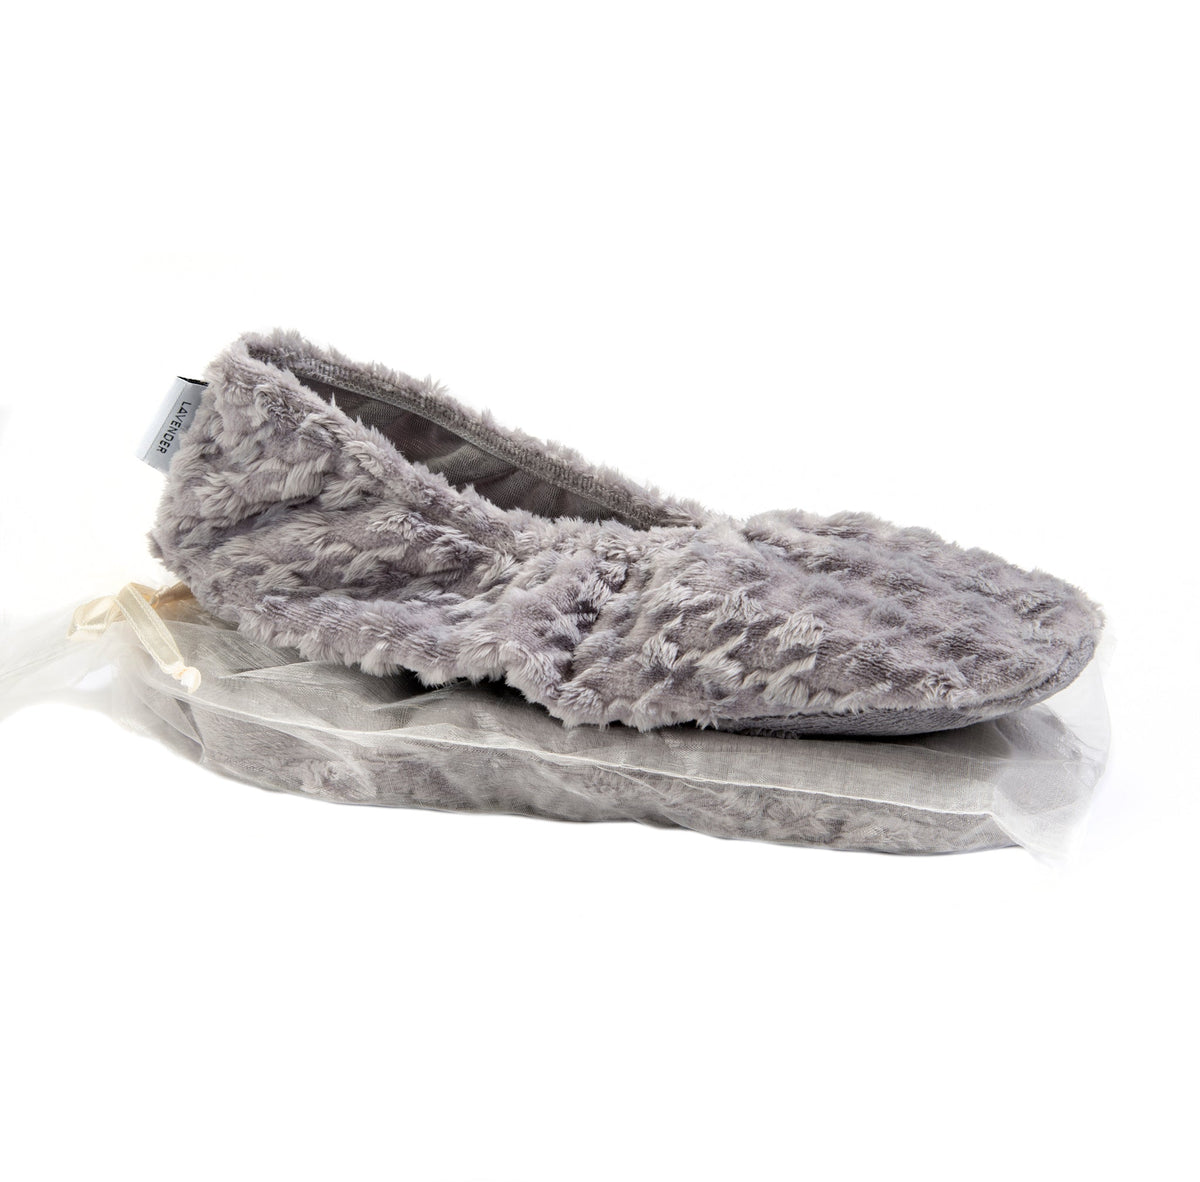 A plush, grey Sonoma Lavender Silver Houndstooth heated footies slipper with a fluffy texture, displayed on a white background, still wrapped partially in transparent plastic packaging.